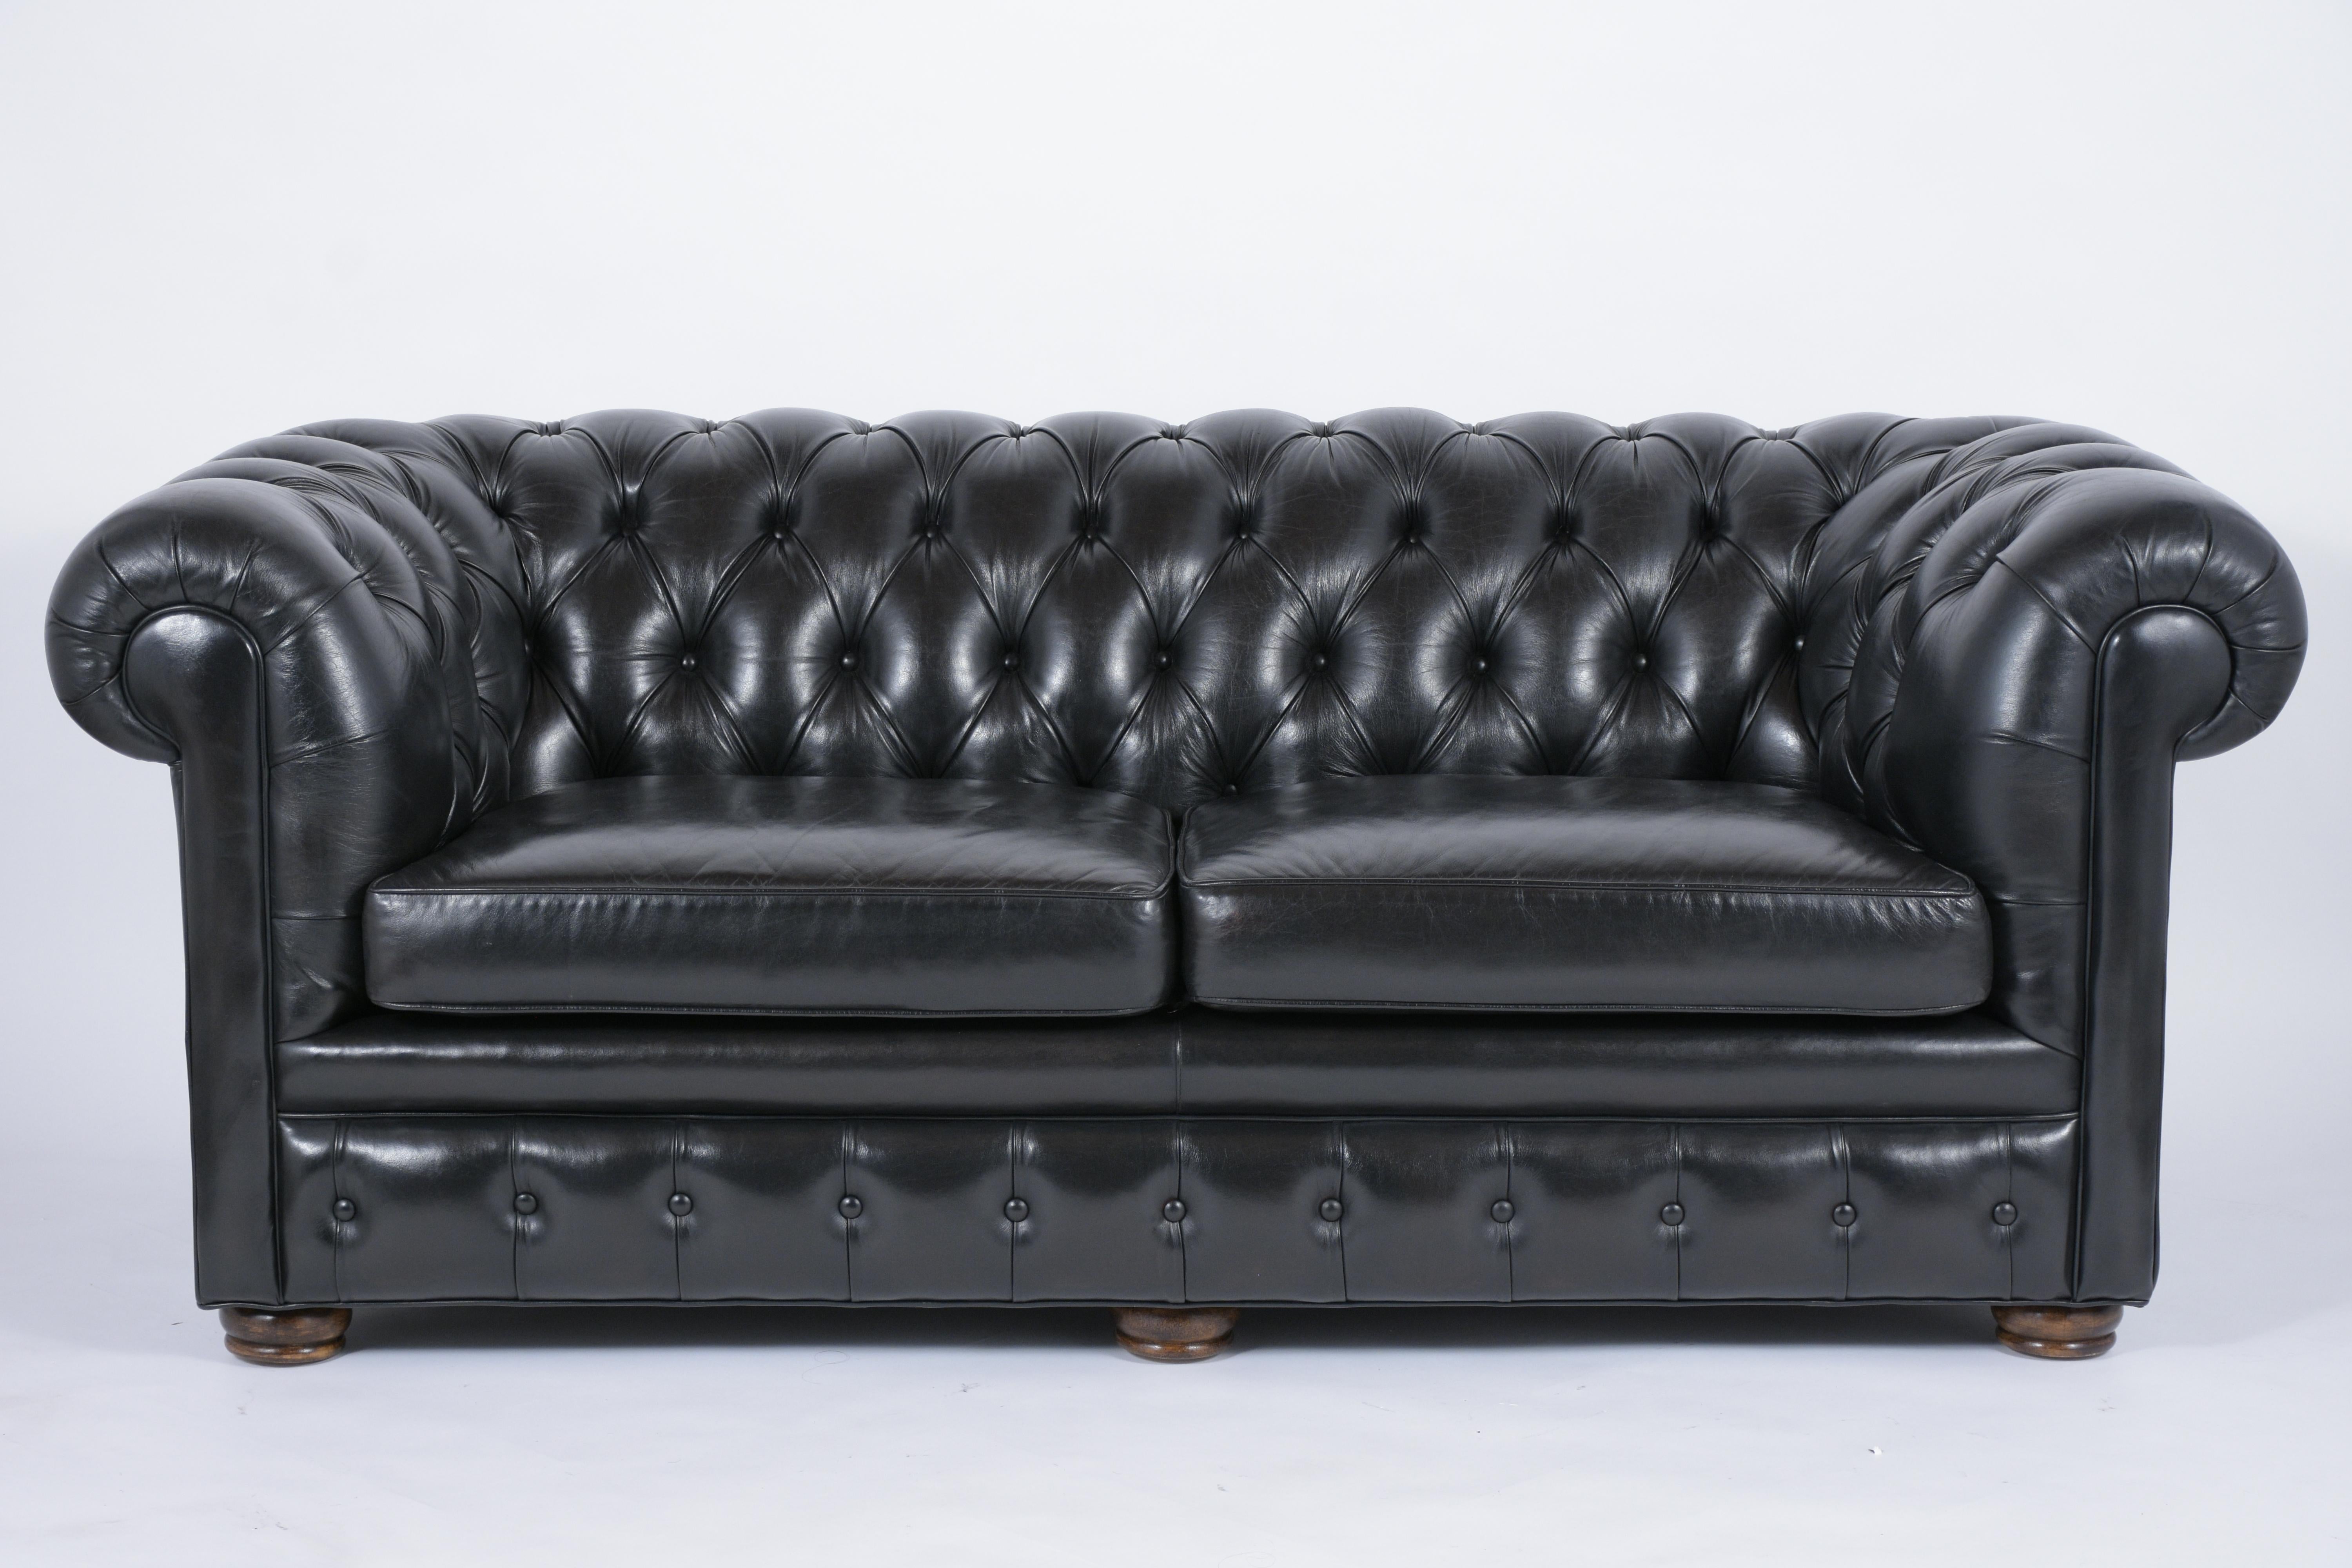 This 1970s leather chesterfield sofa has been professionally restored, comes with its original leather dyed in a very dark brown color, and newly polished patina finish. The sofa features a tufted design on the arms & backrest, single piping details